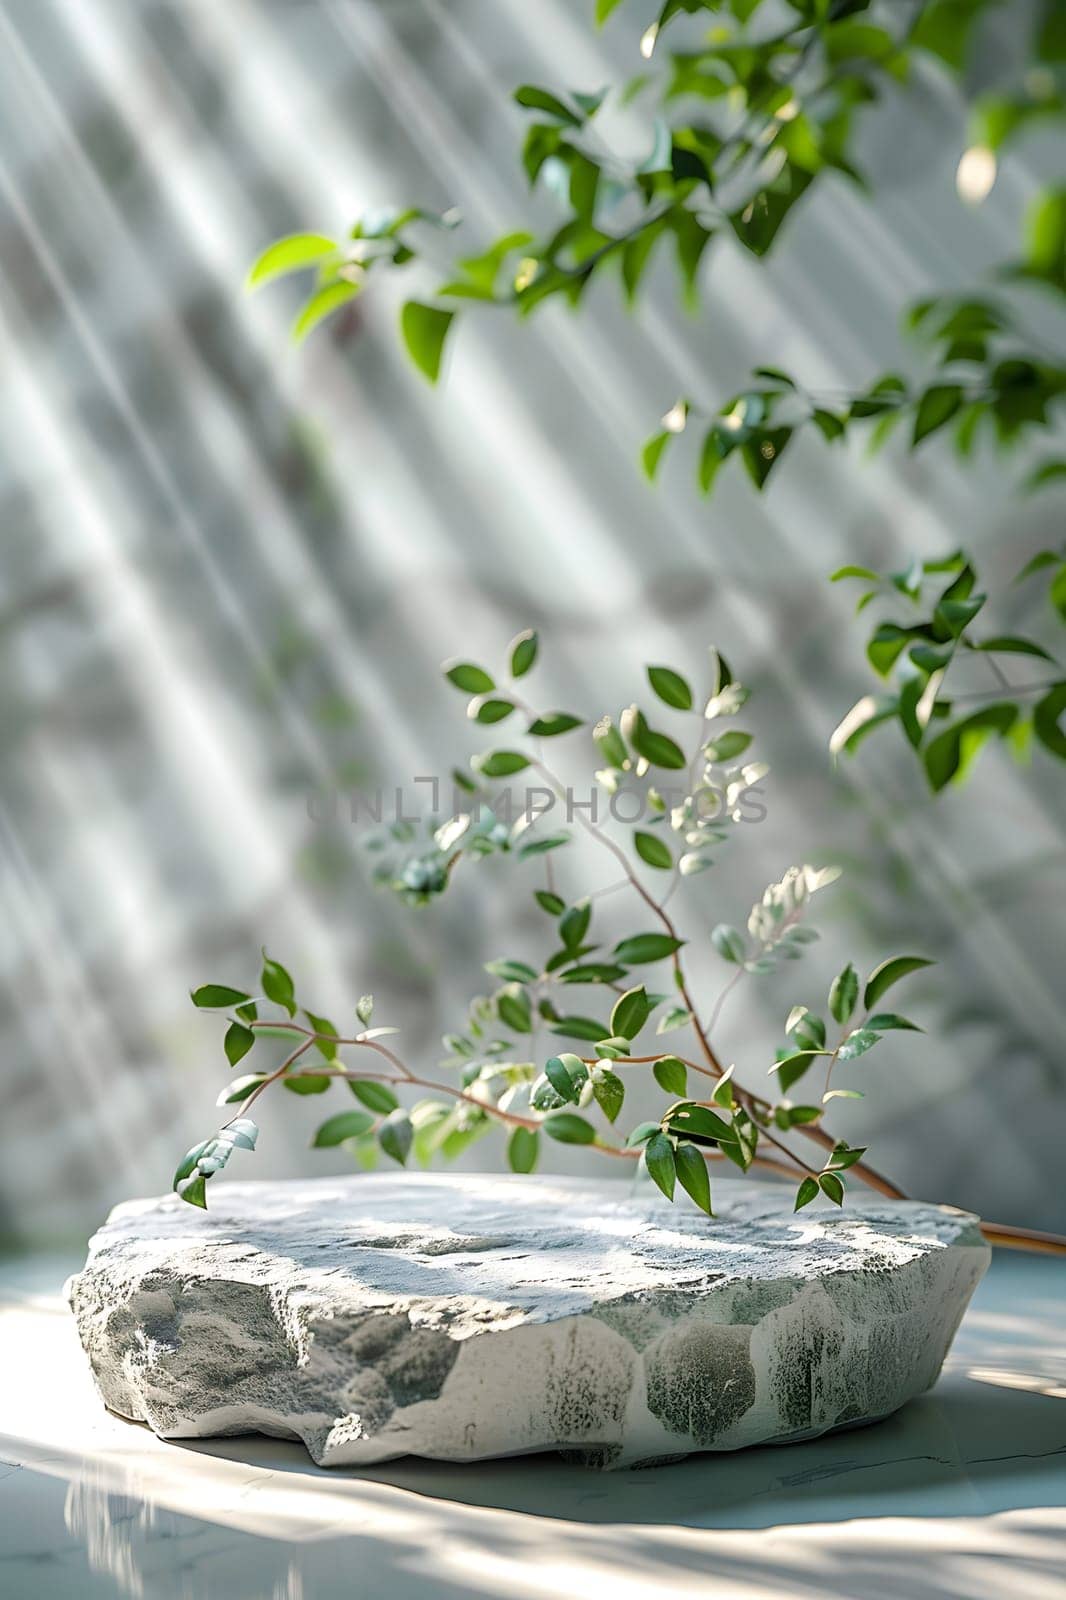 Plant growing out of stone podium, surrounded by grass and twigs by Nadtochiy